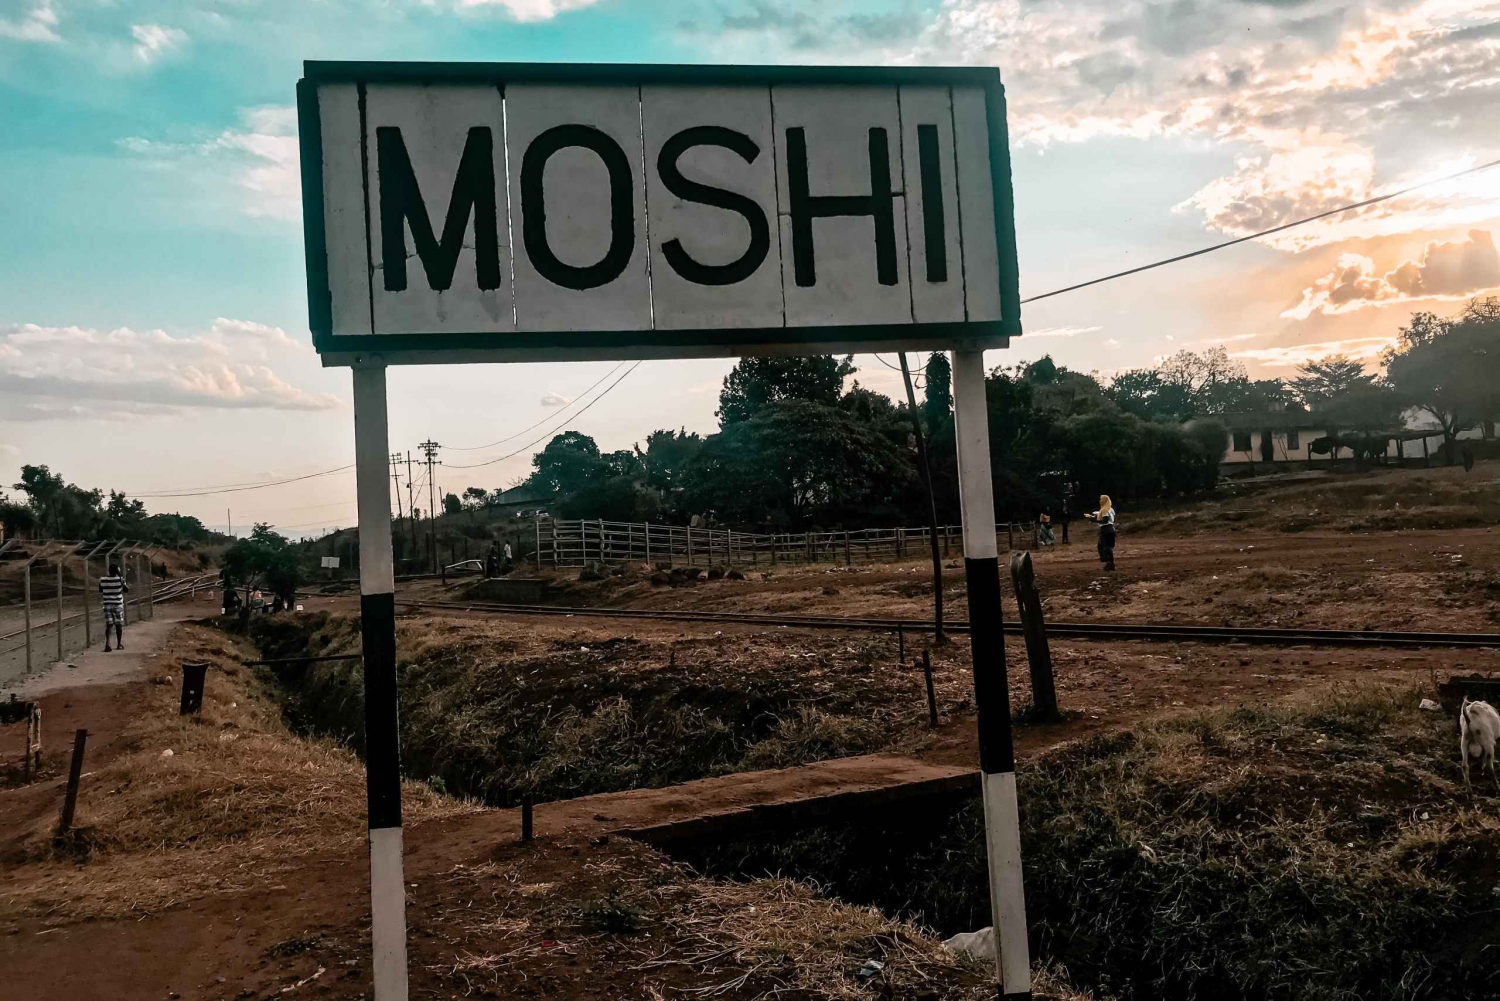 Guided City tour of Moshi